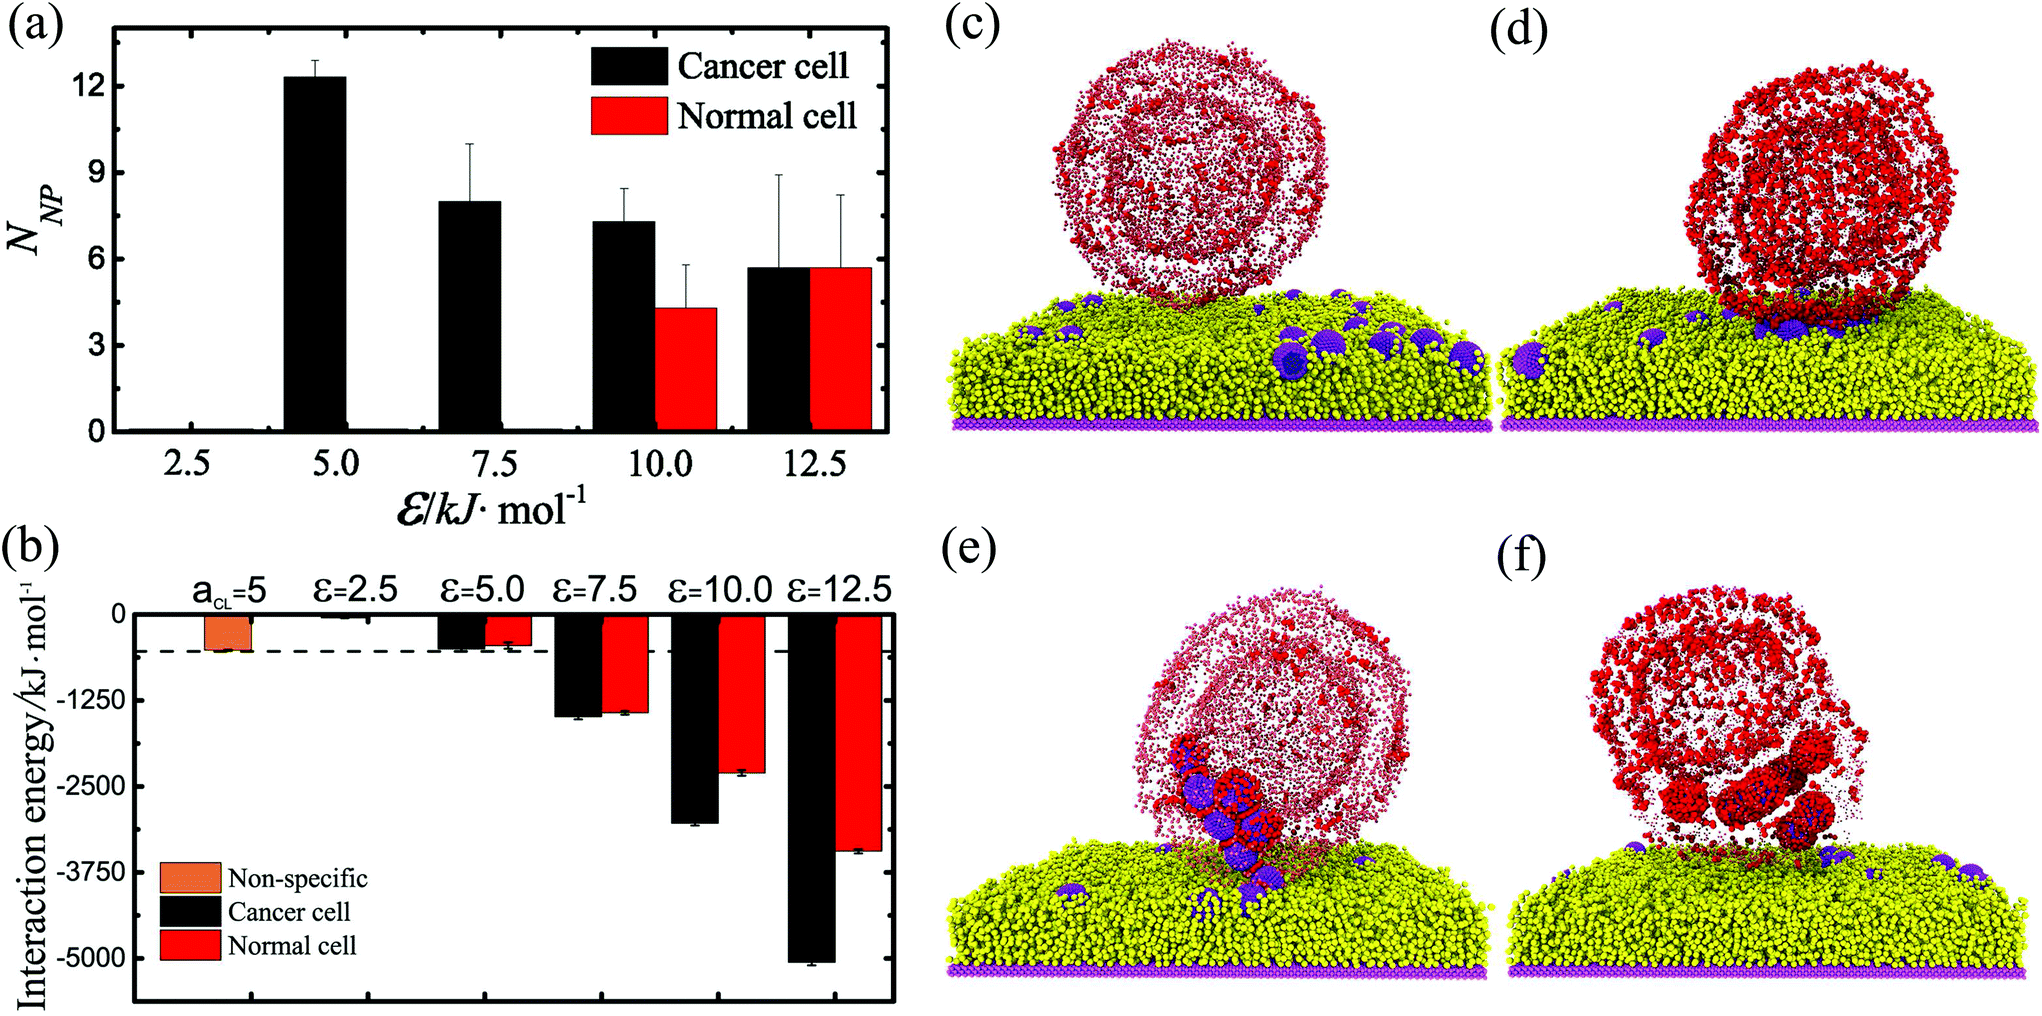 Designing A Nanoparticle Containing Polymeric Substrate For Detecting Cancer Cells By Computer Simulations Nanoscale Rsc Publishing Doi 10 1039 C8nrk